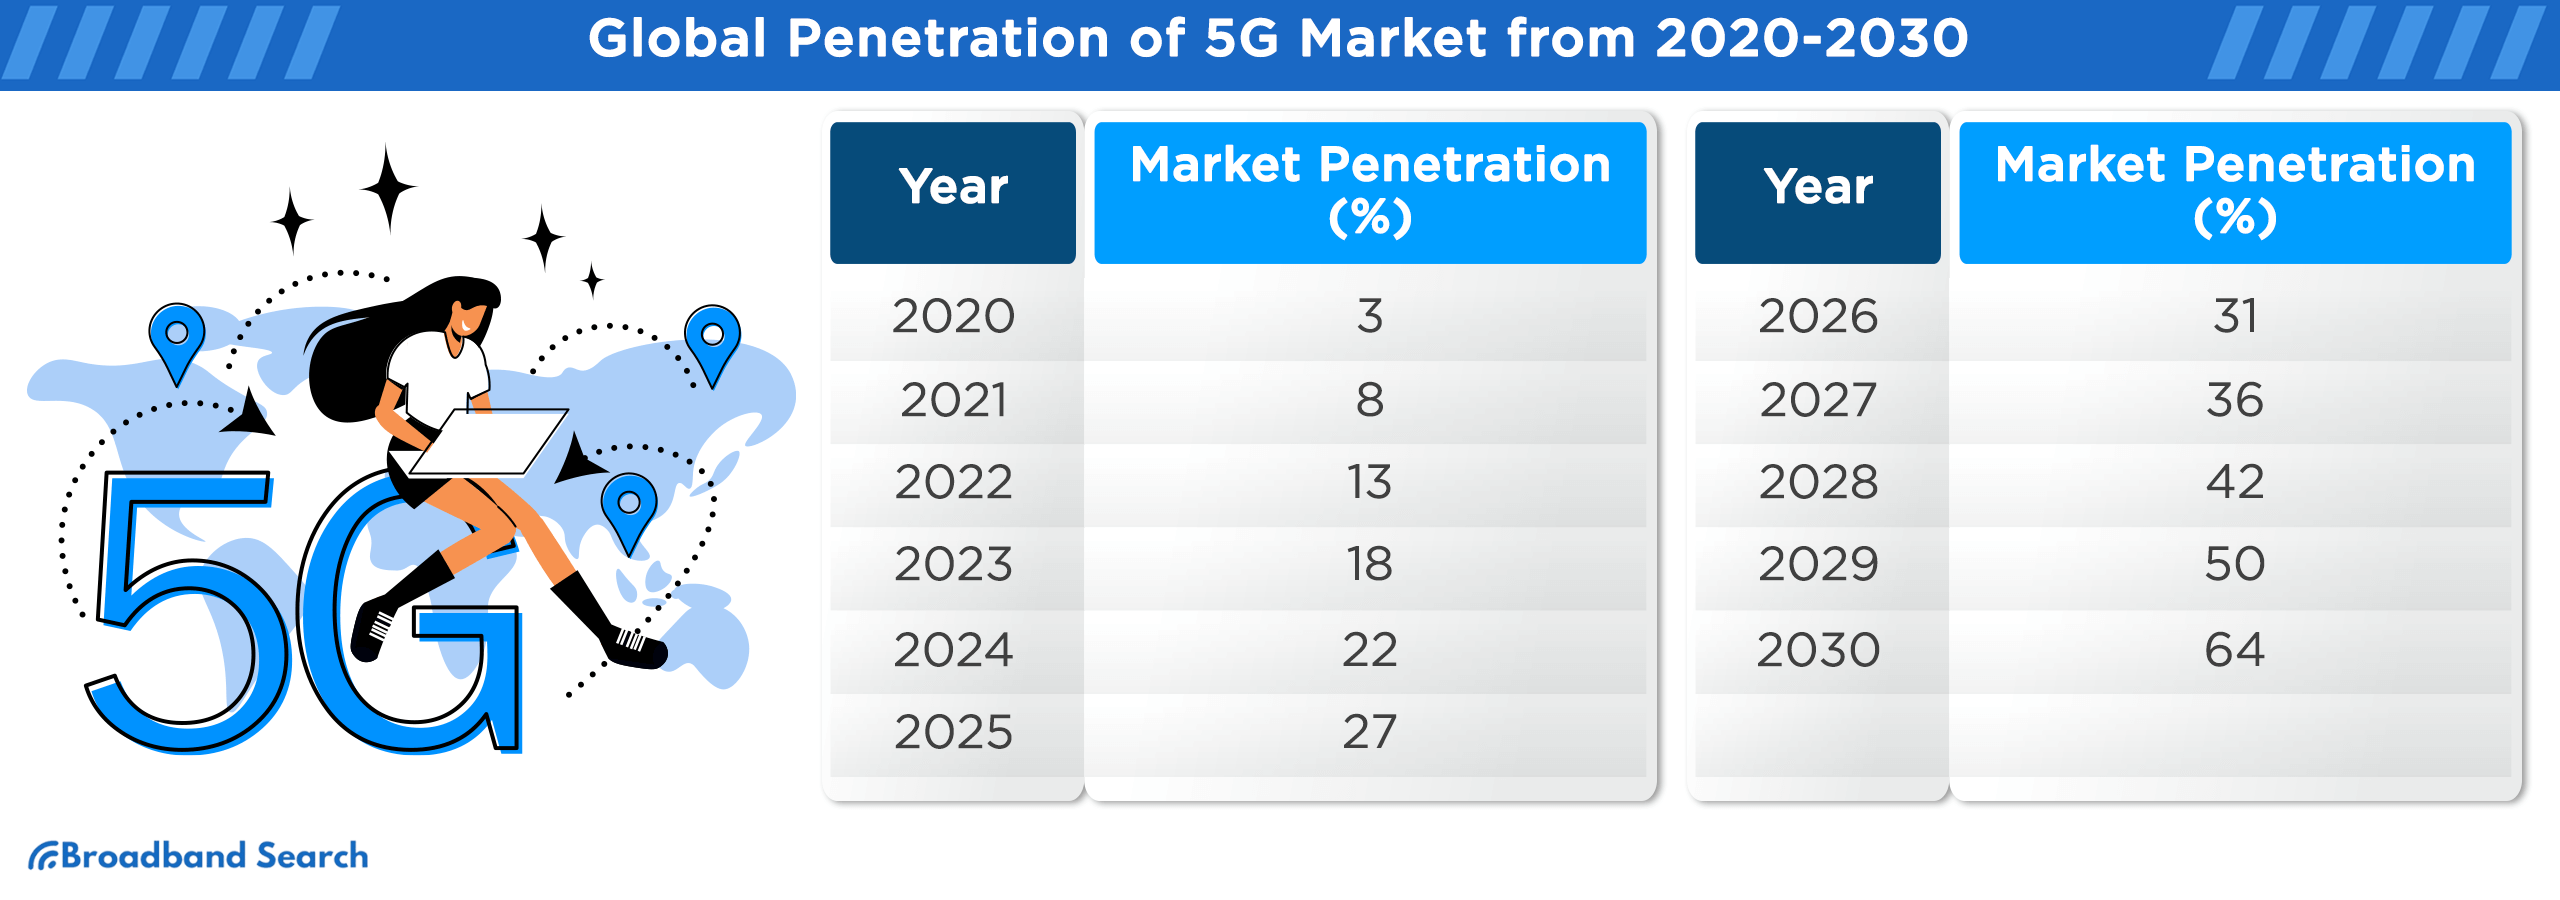 Global Penetration of 5G Market From 2020-2030